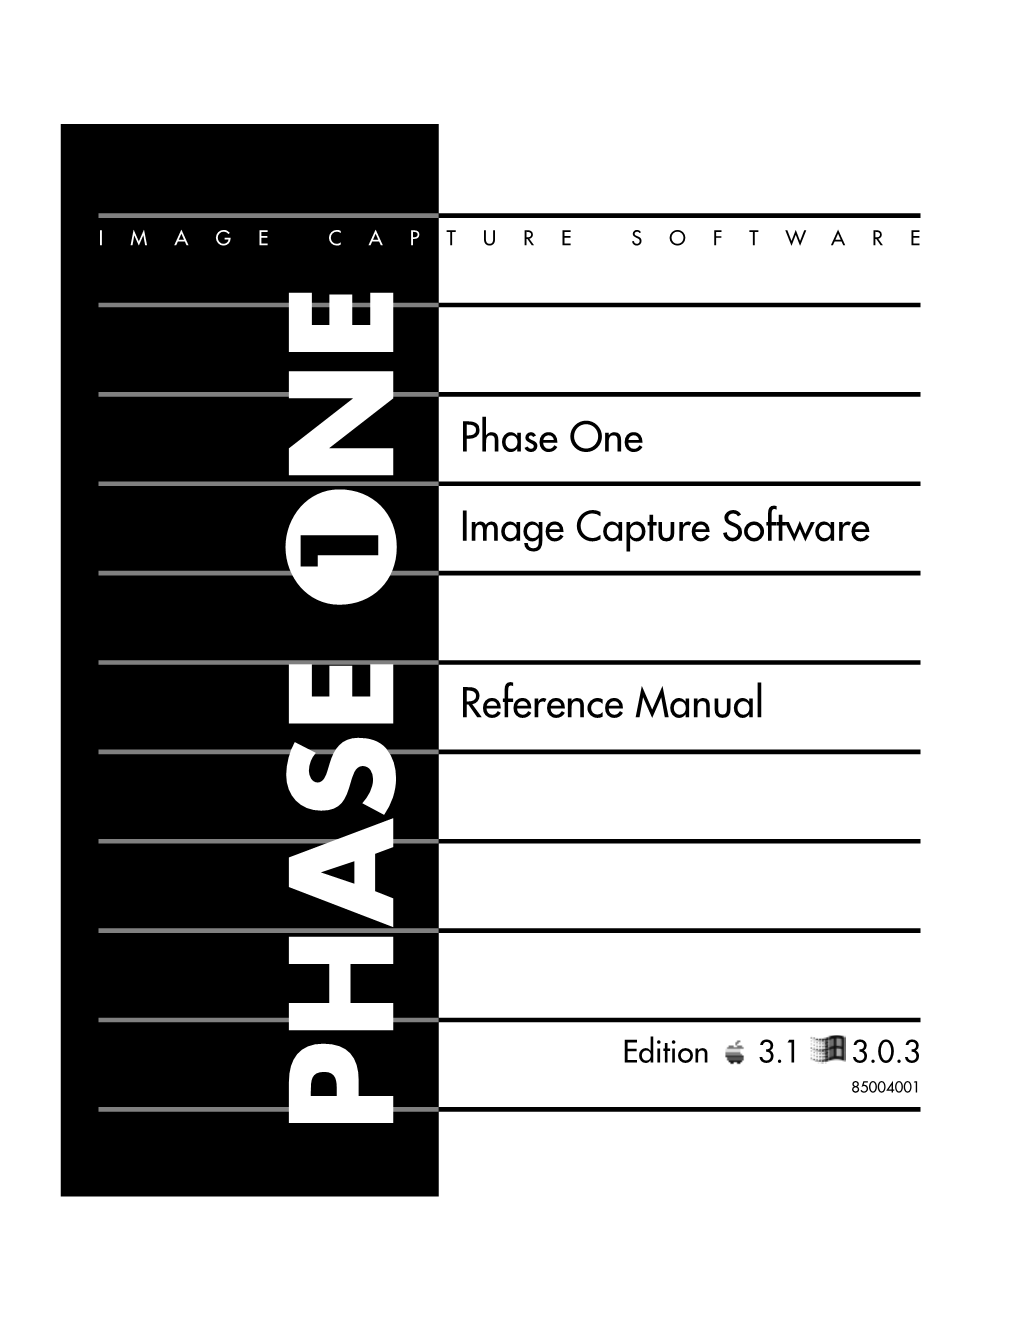 Image Capture Software Reference Manual Phase